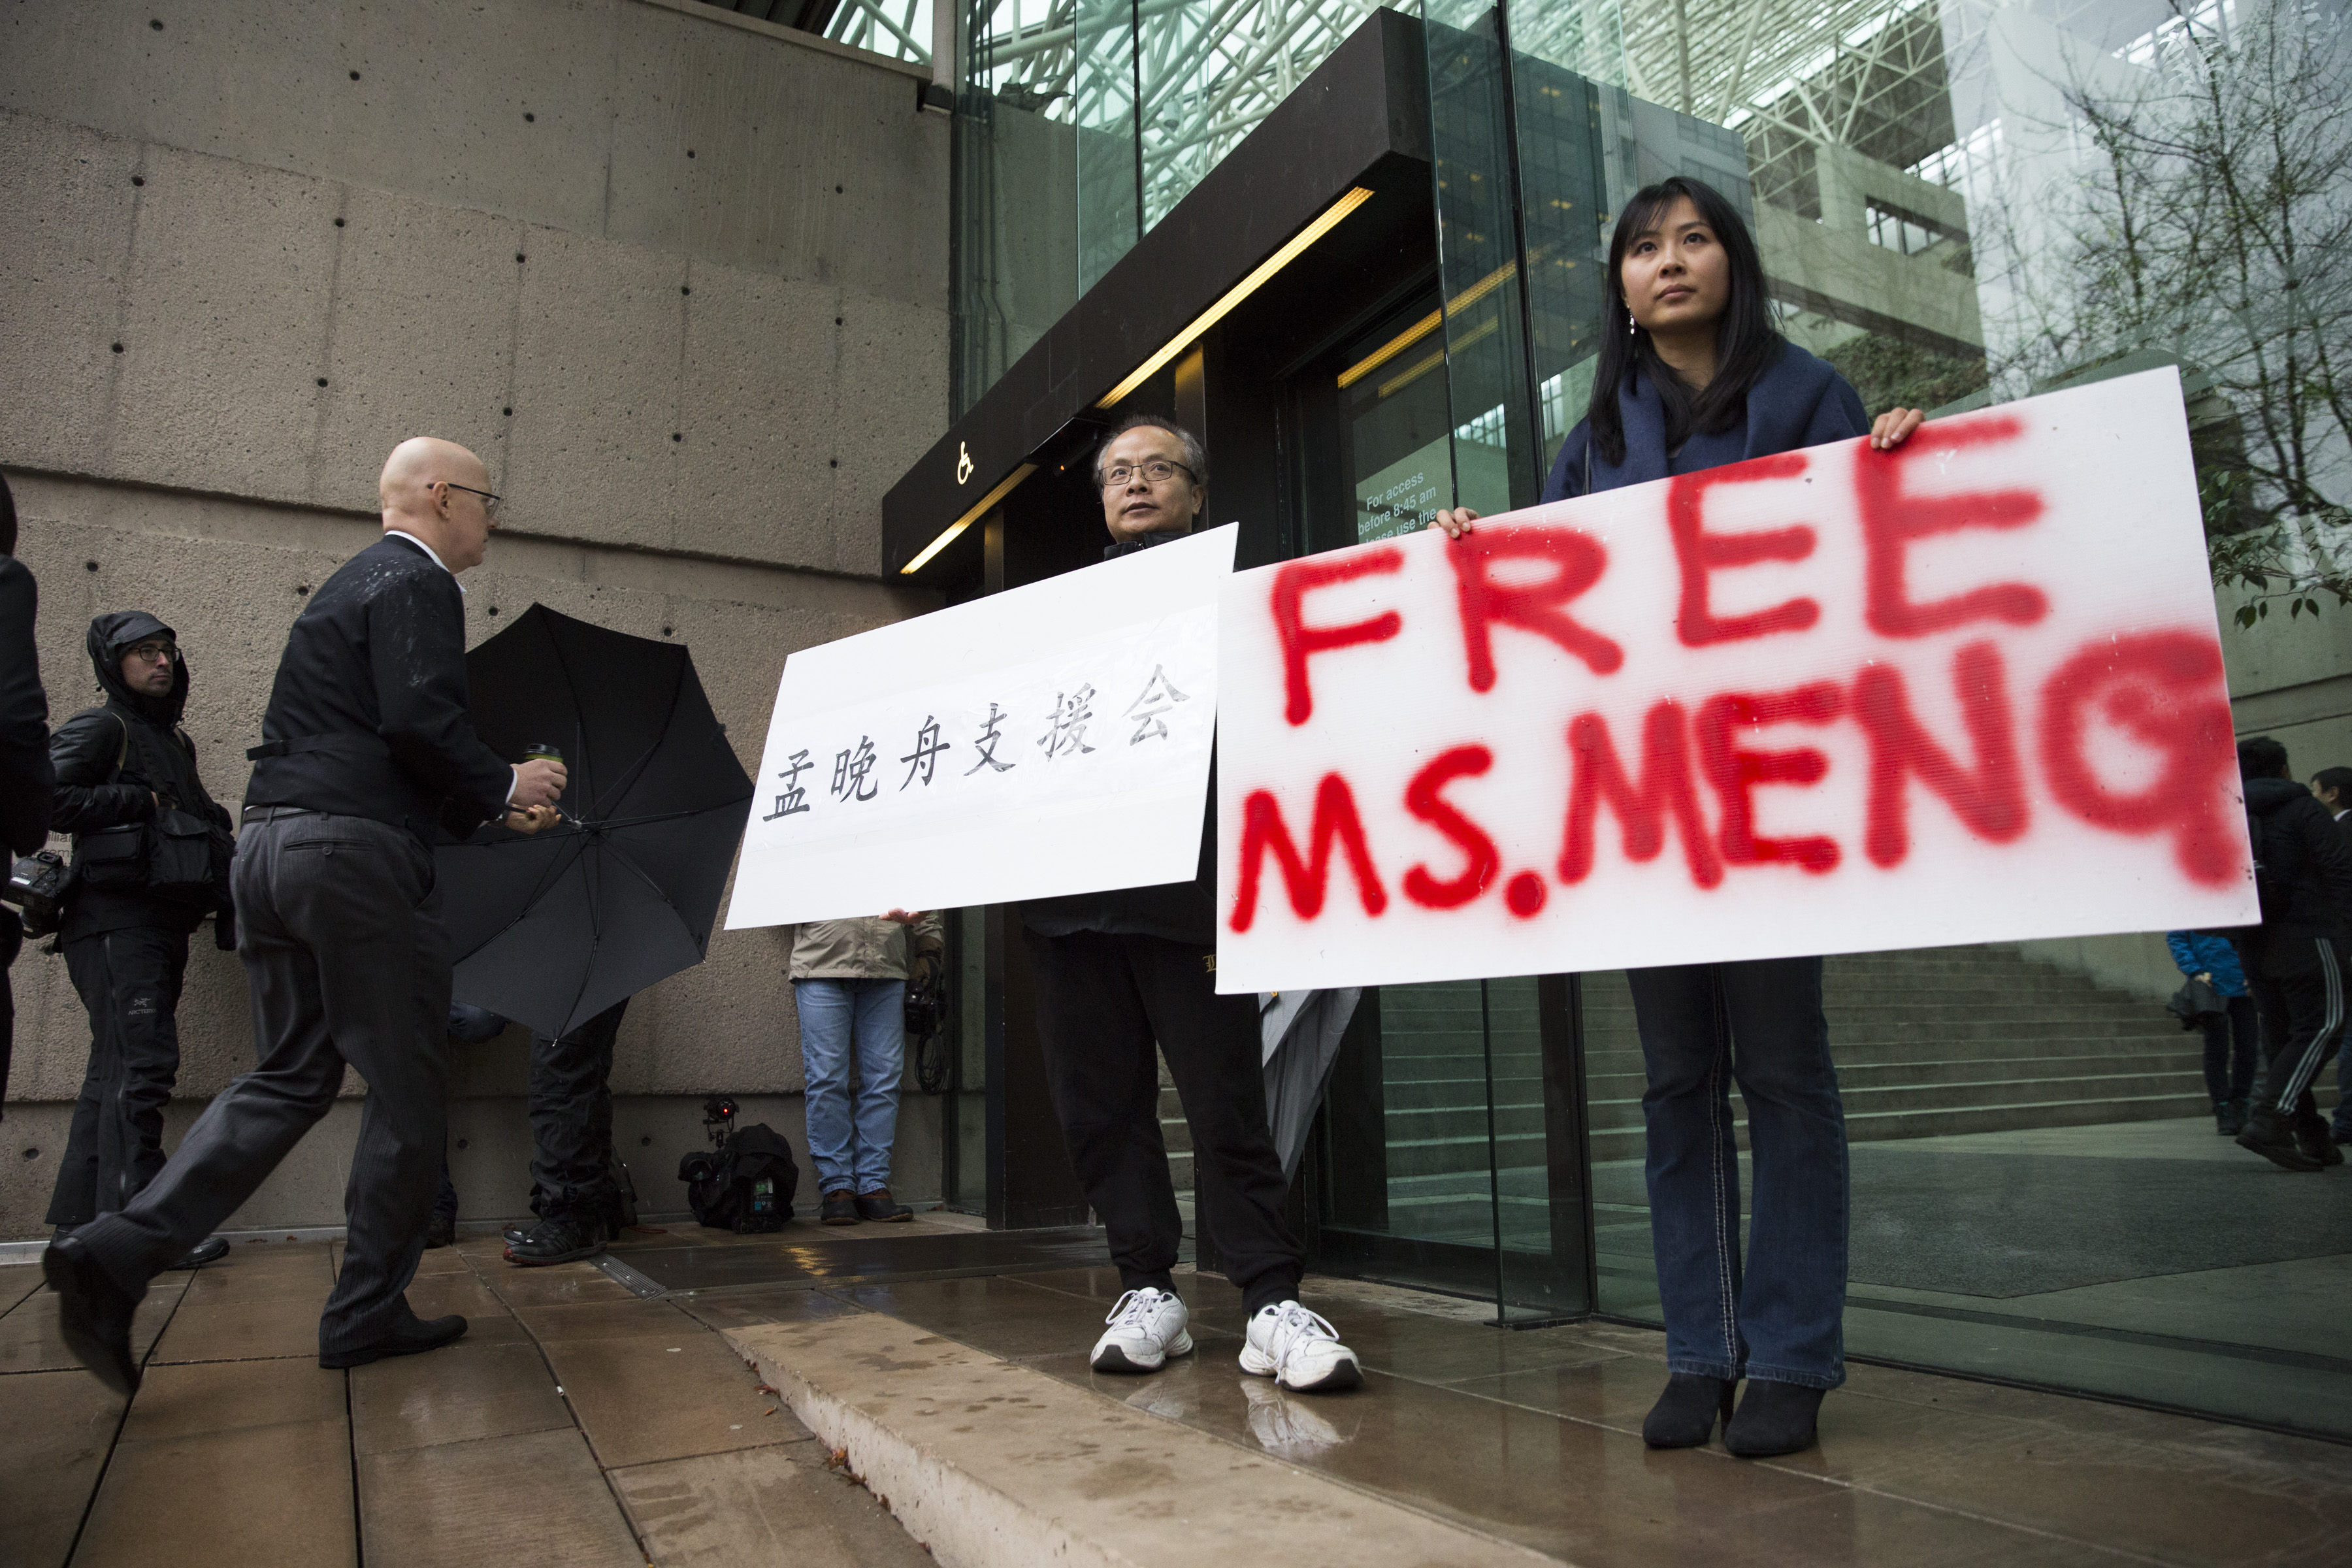 Robert Long (L) and Ada Yu hold signs in favor of Huawei Technologies Chief Financial Officer Meng Wanzhou outside her bail hearing at British Columbia Superior Courts following her December 1 arrest in Canada for extradition to the US, in Vancouver, British Columbia on December 11, 2018. (Photo by Jason Redmond / AFP) 